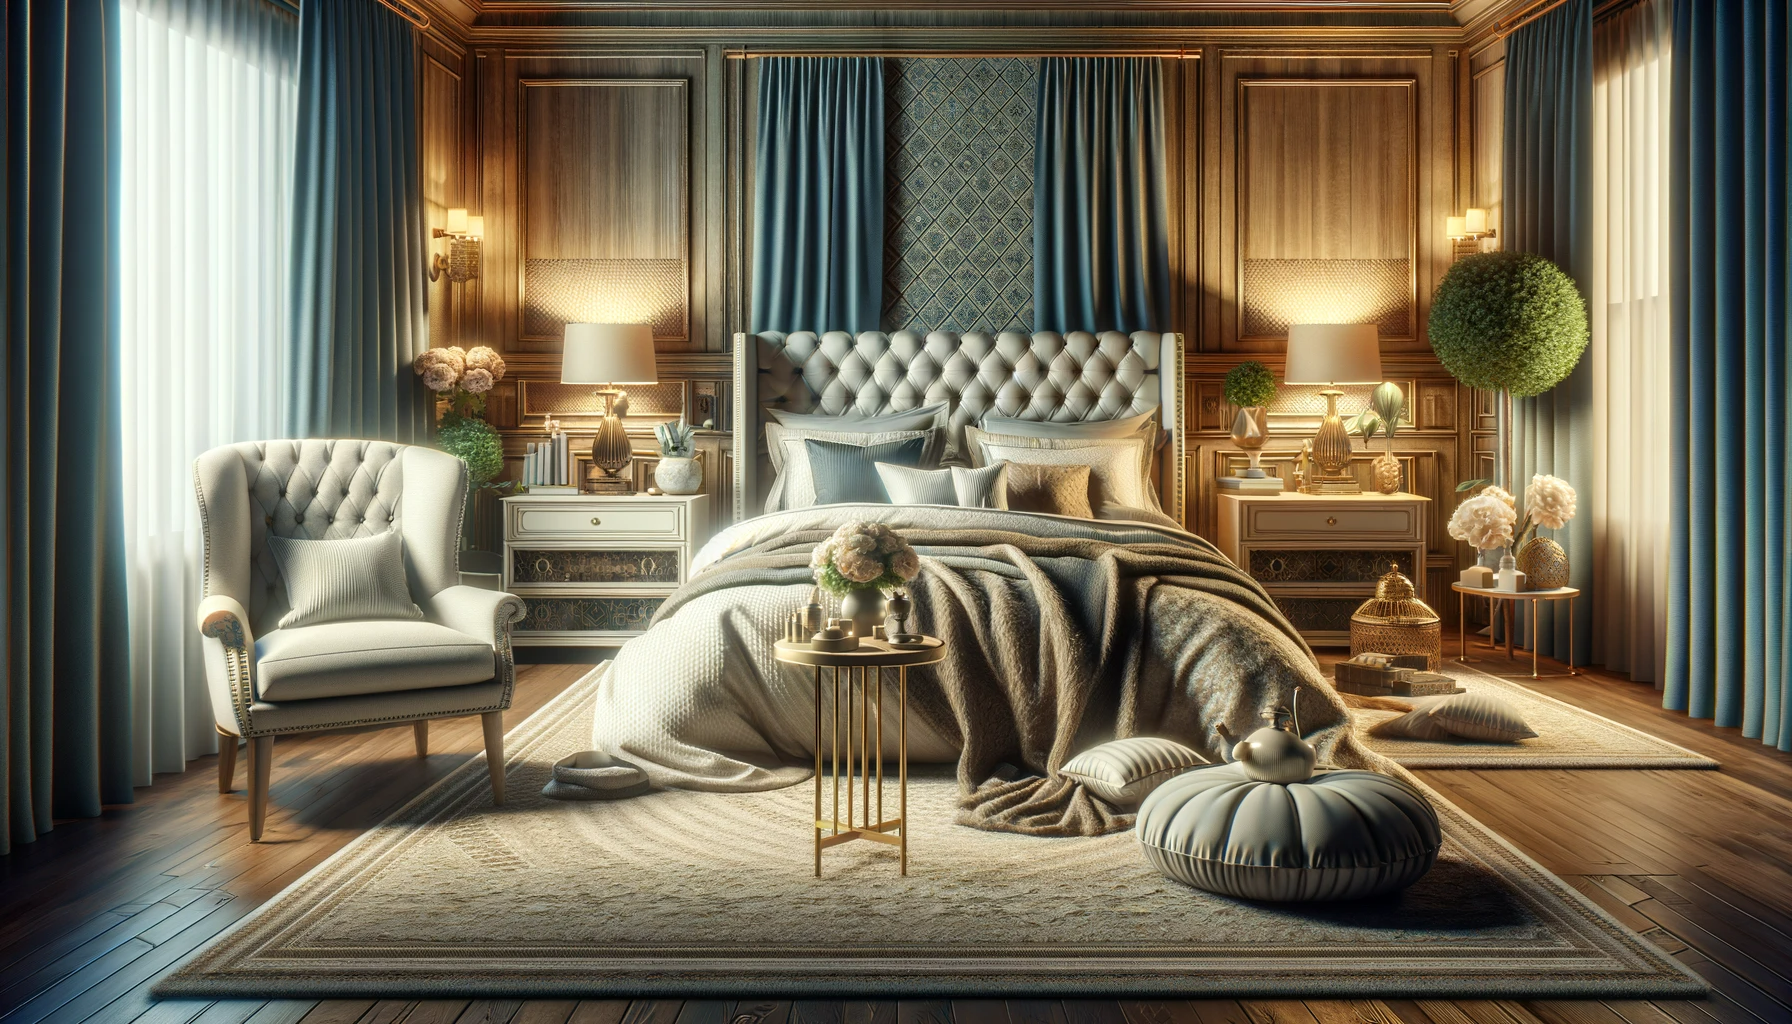 luxury bedding's unique features and comforts in an elegant bedroom setting. Show various types of high-end bedding material